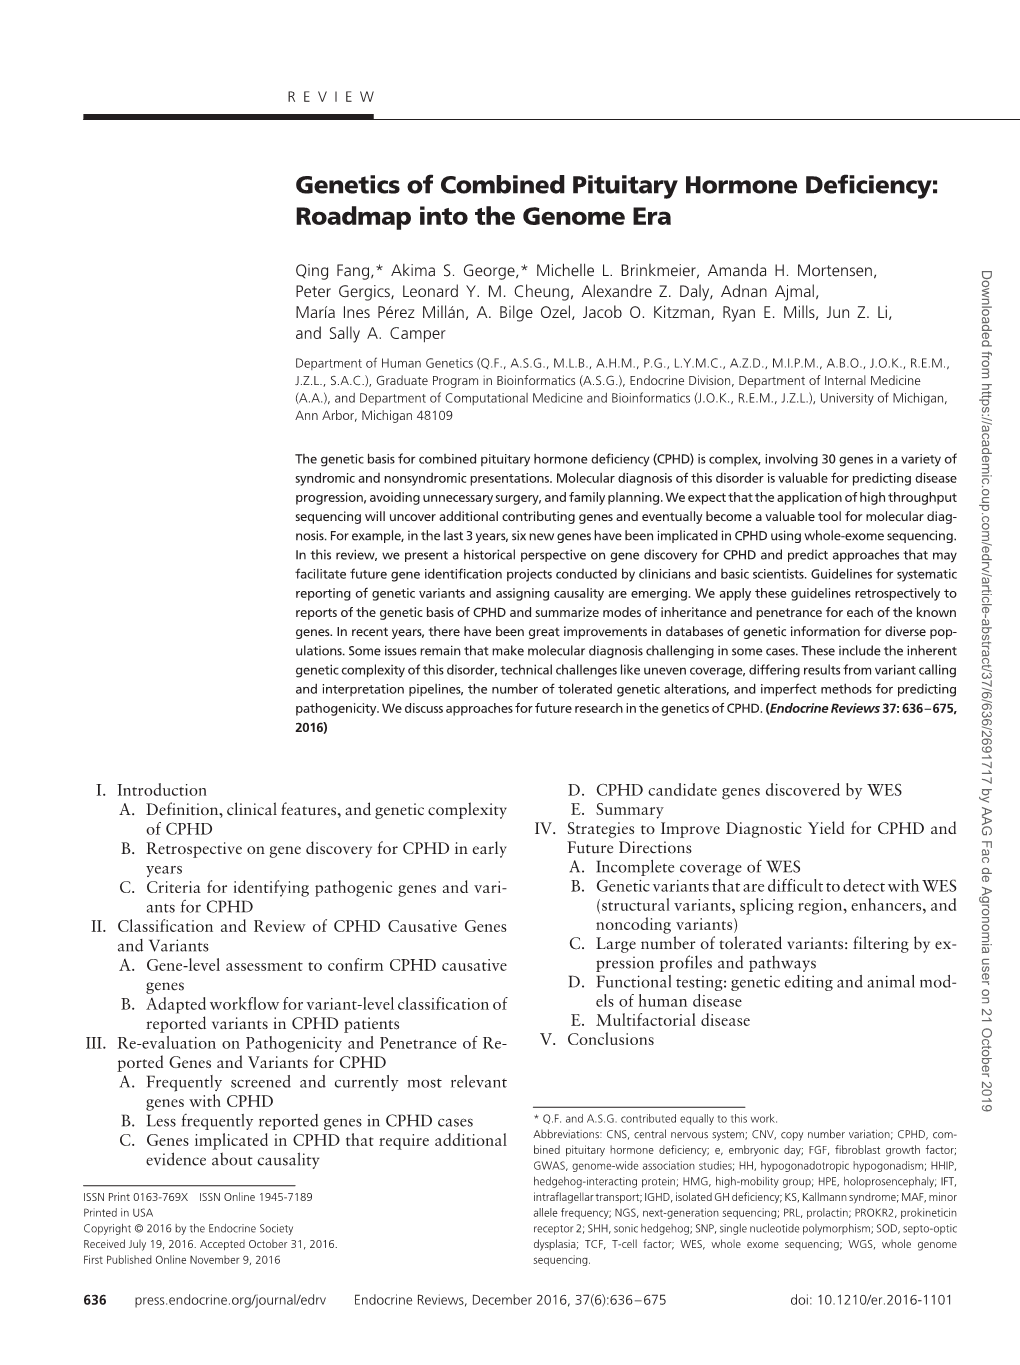 Genetics of Combined Pituitary Hormone Deficiency: Roadmap Into the Genome Era